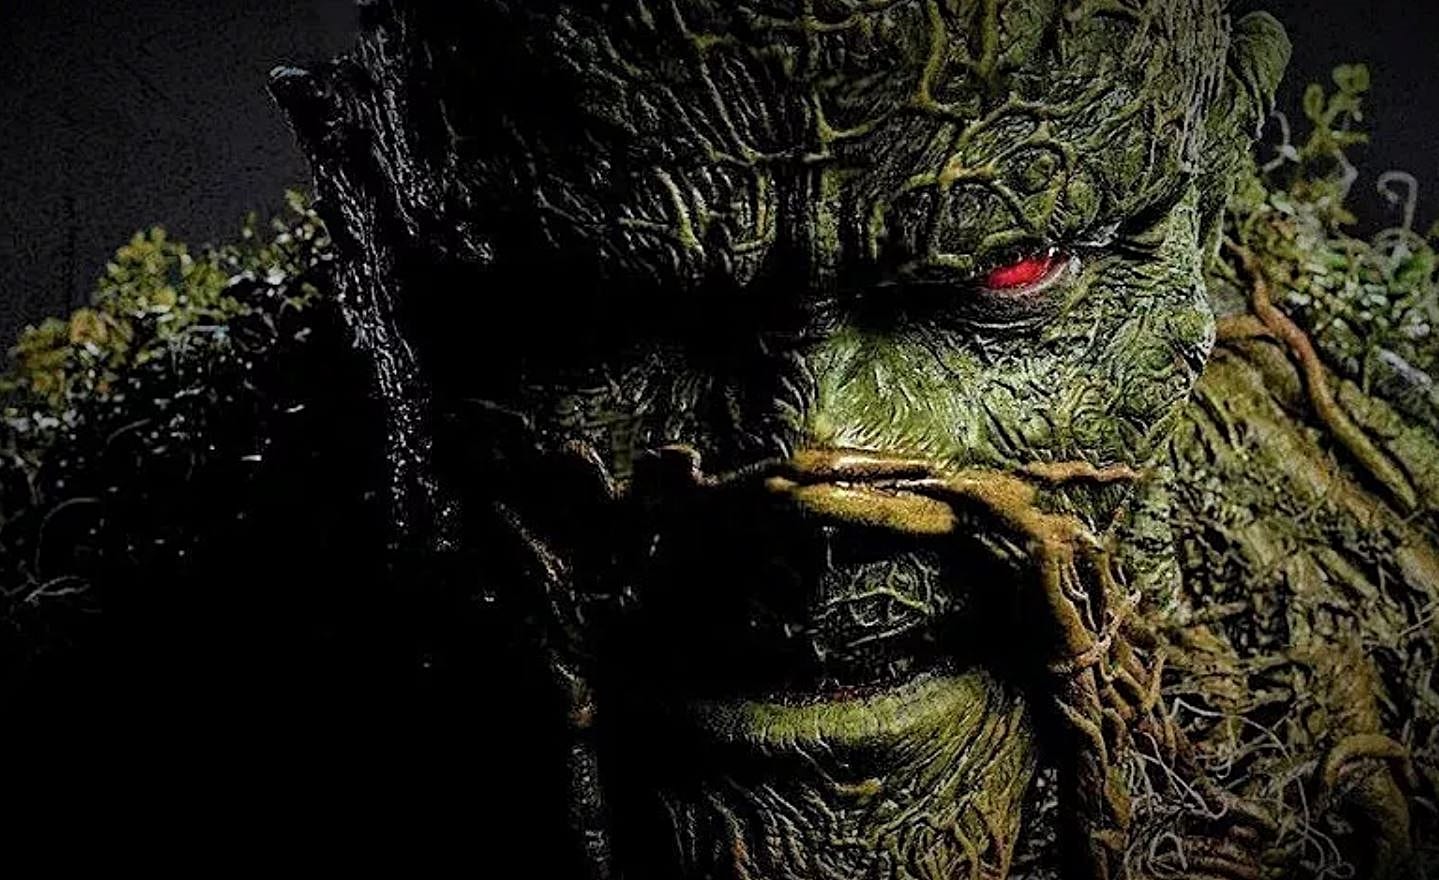 Swamp Thing New Trailer and Poster Released By DC